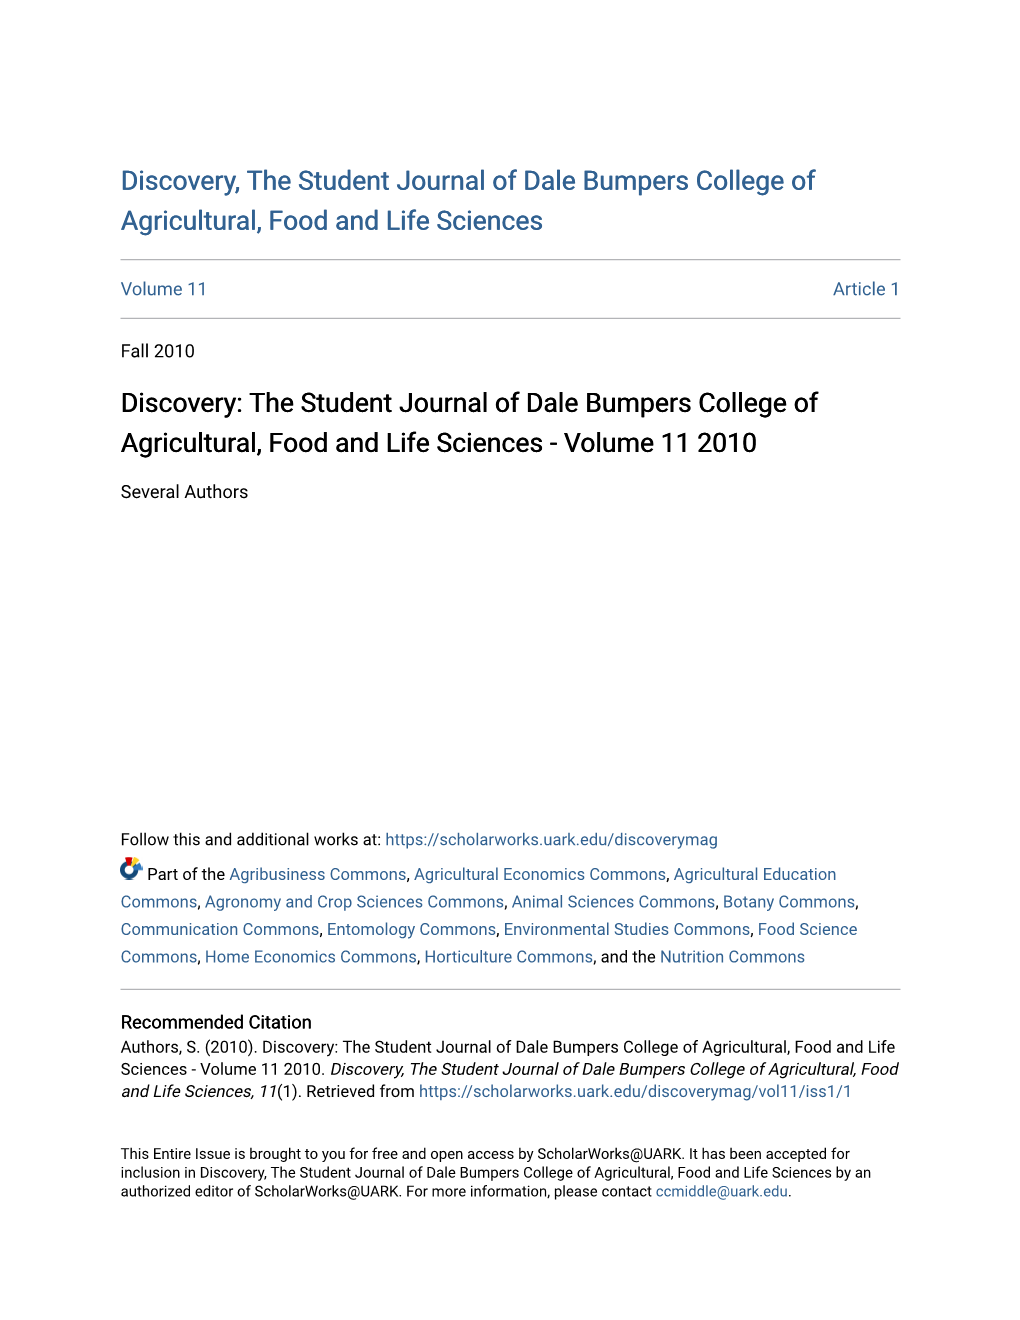 Discovery: the Student Journal of Dale Bumpers College of Agricultural, Food and Life Sciences - Volume 11 2010